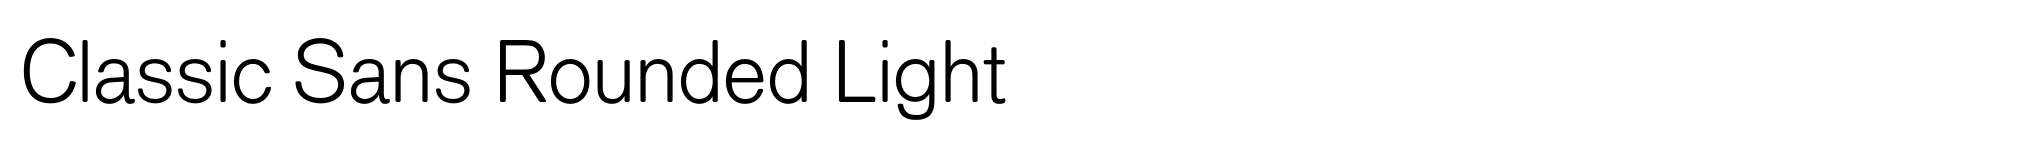 Classic Sans Rounded Light image